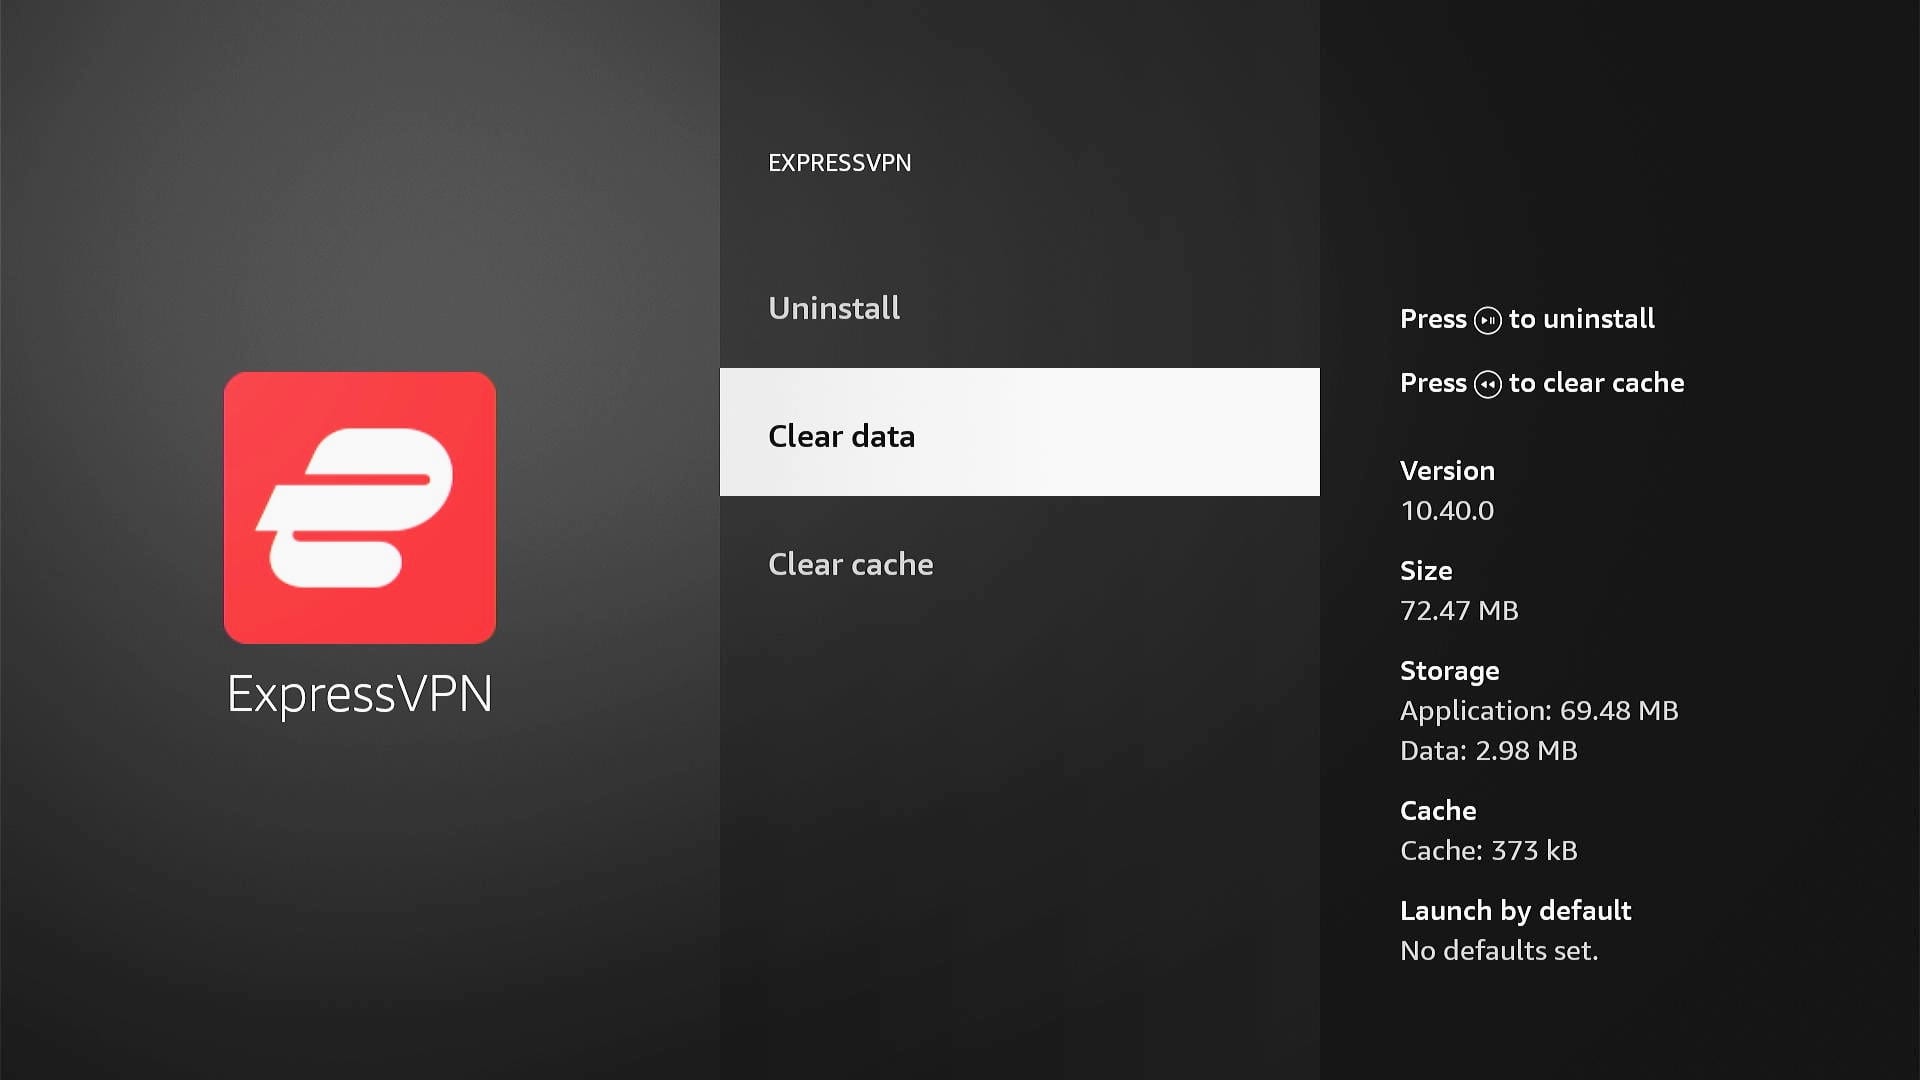 The Clear Data and Clear Cache options on Amazon Fire TV for ExpressVPN